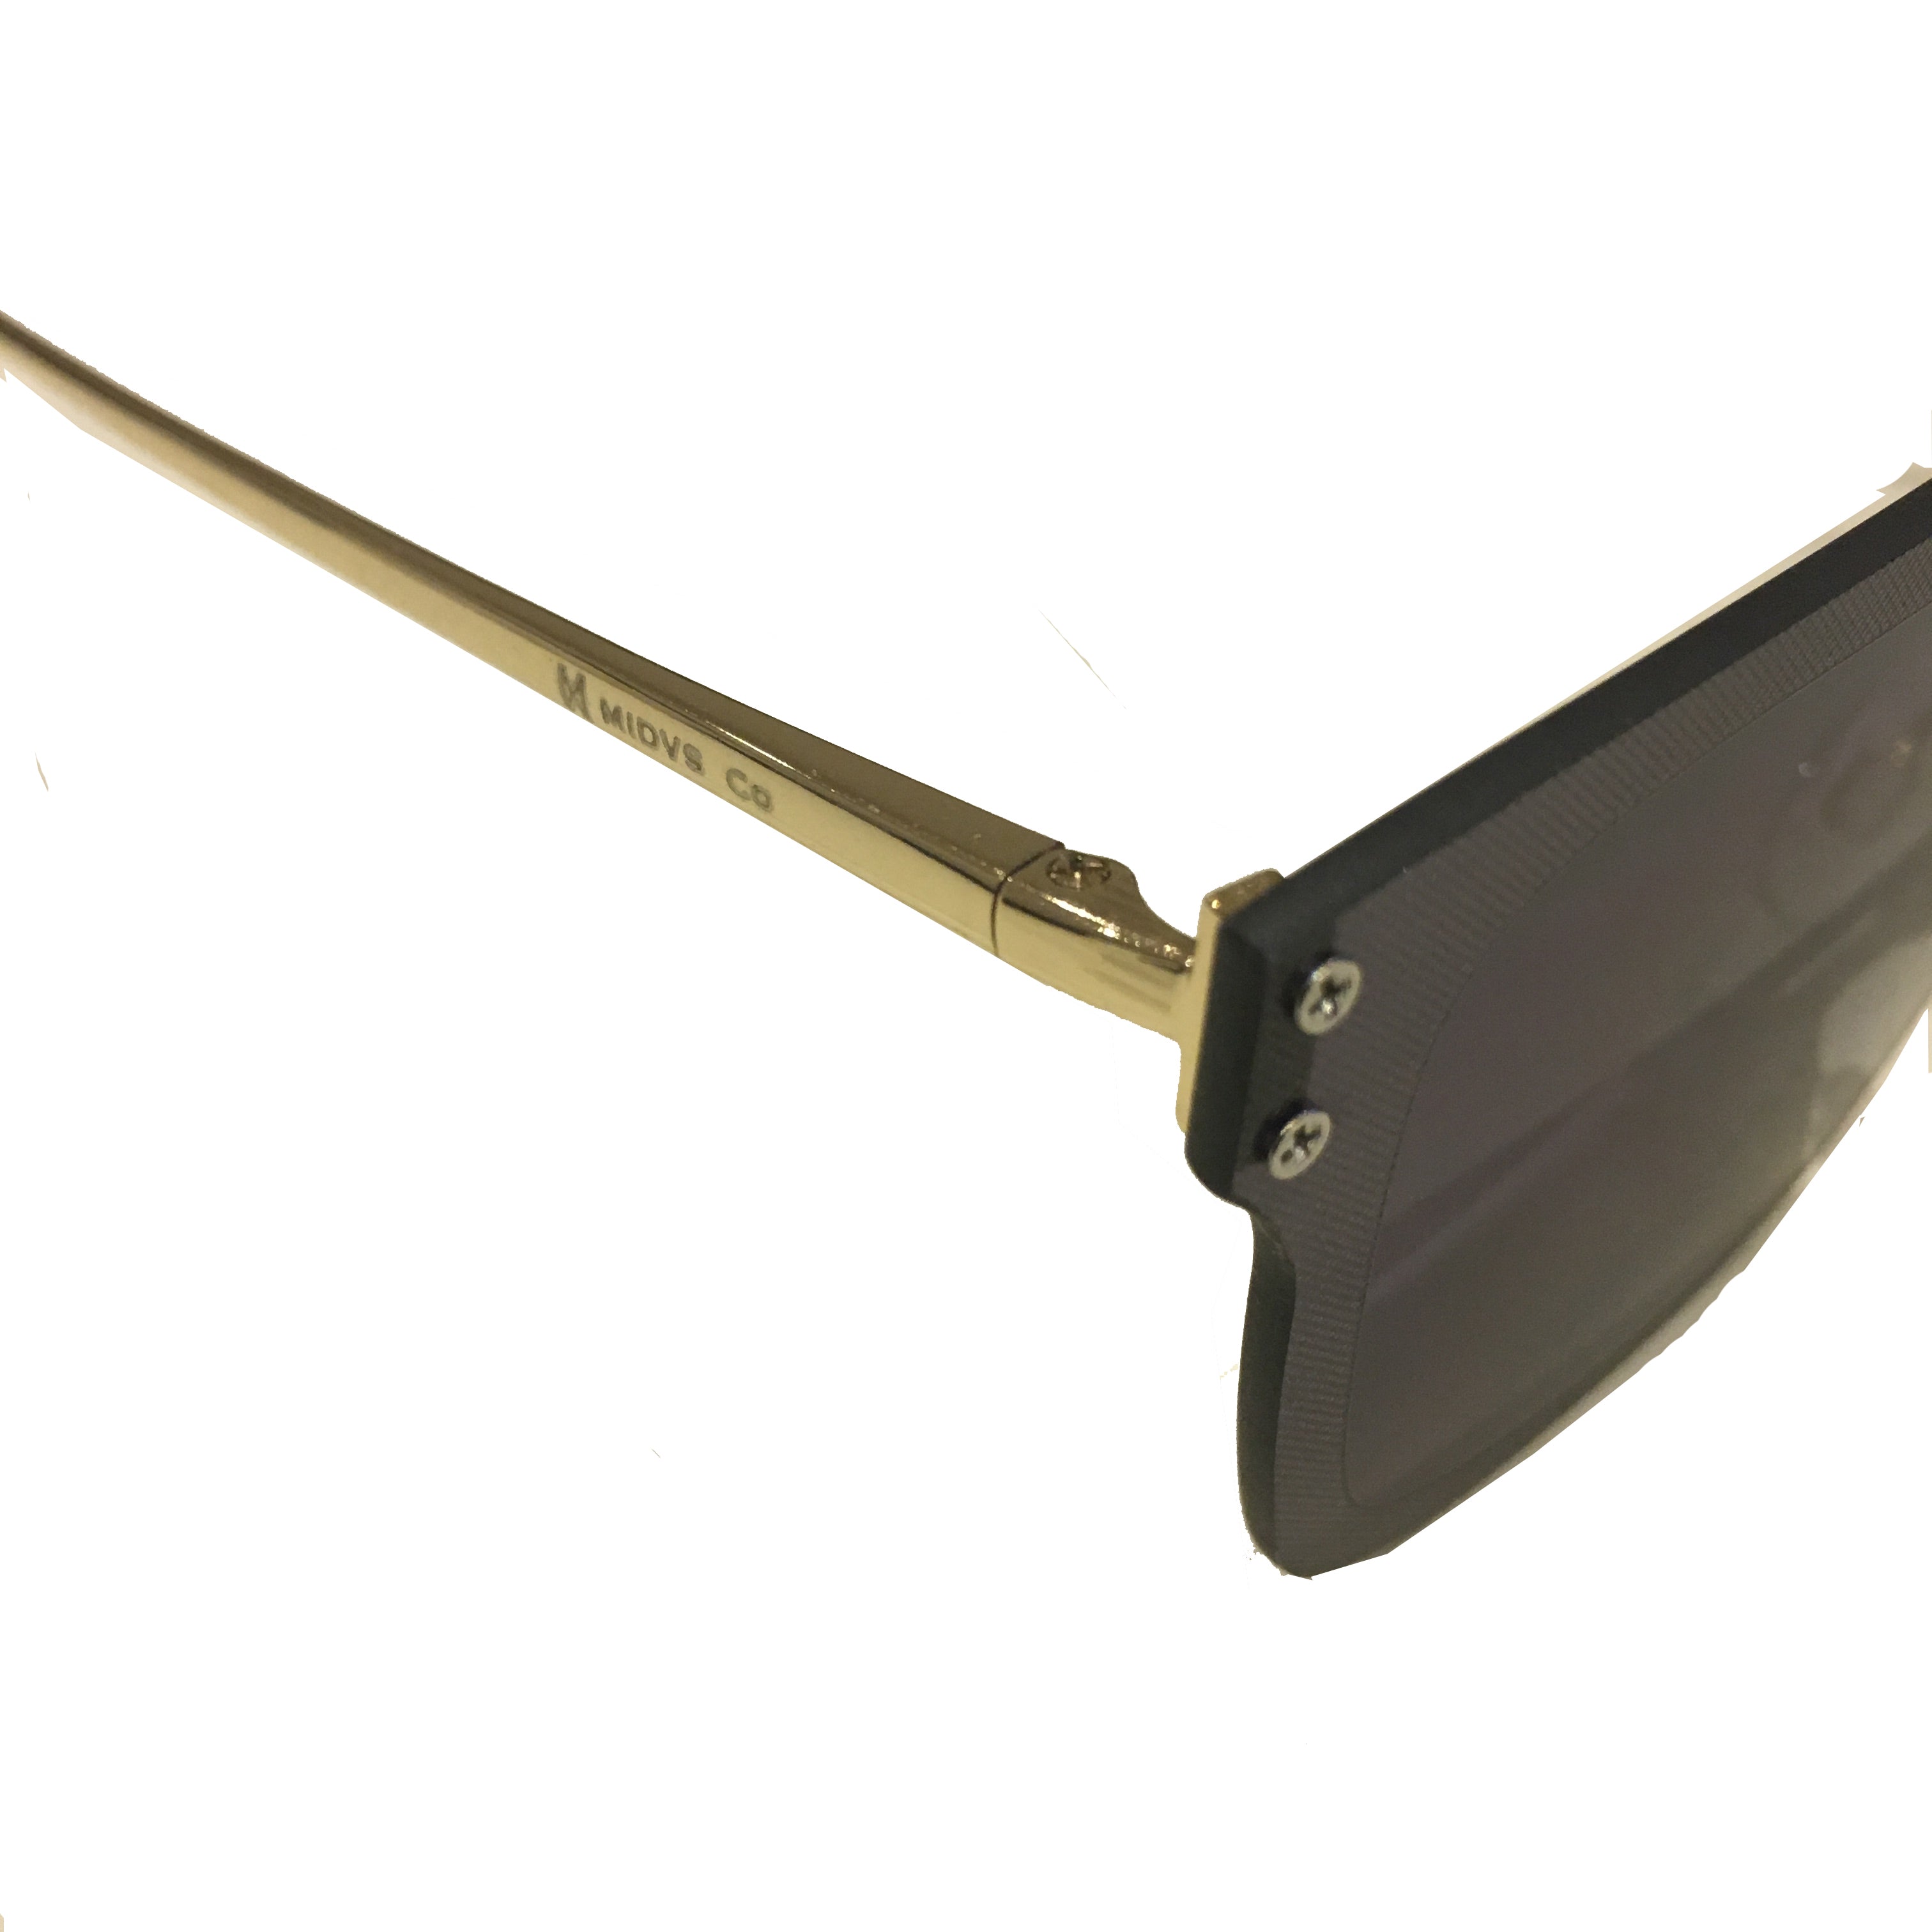 The Kilo Shades Black / Gold by Midvs Co